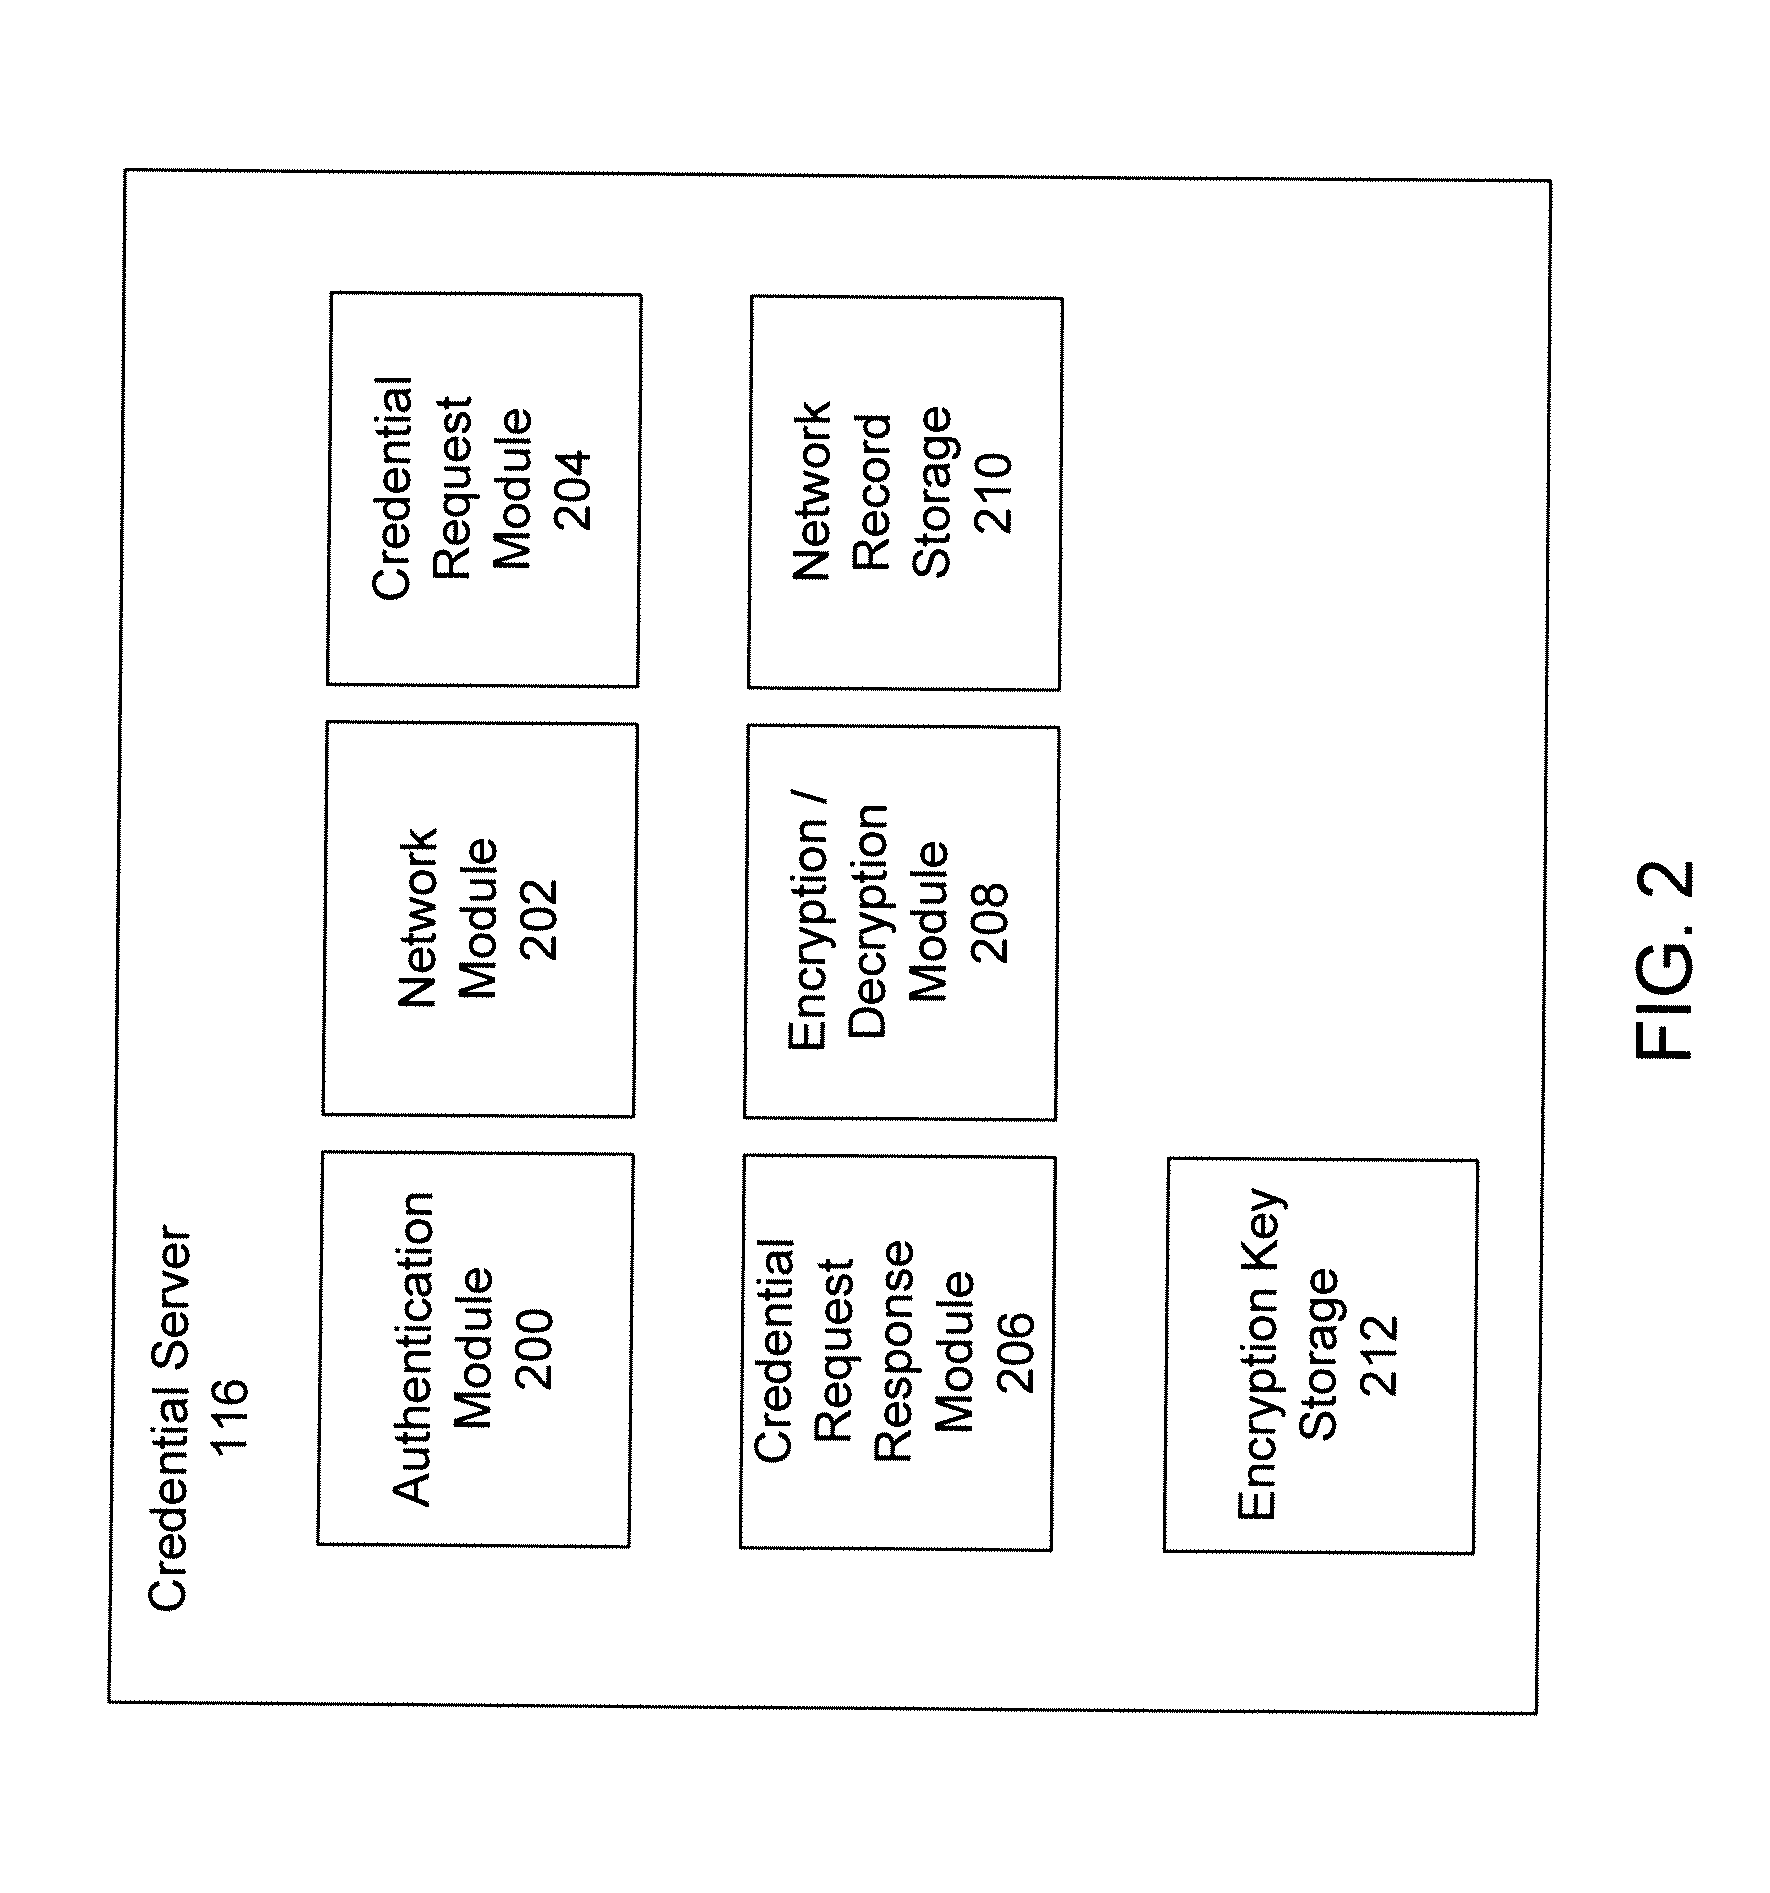 Systems and Methods for Wireless Network Selection Based on Attributes Stored in a Network Database